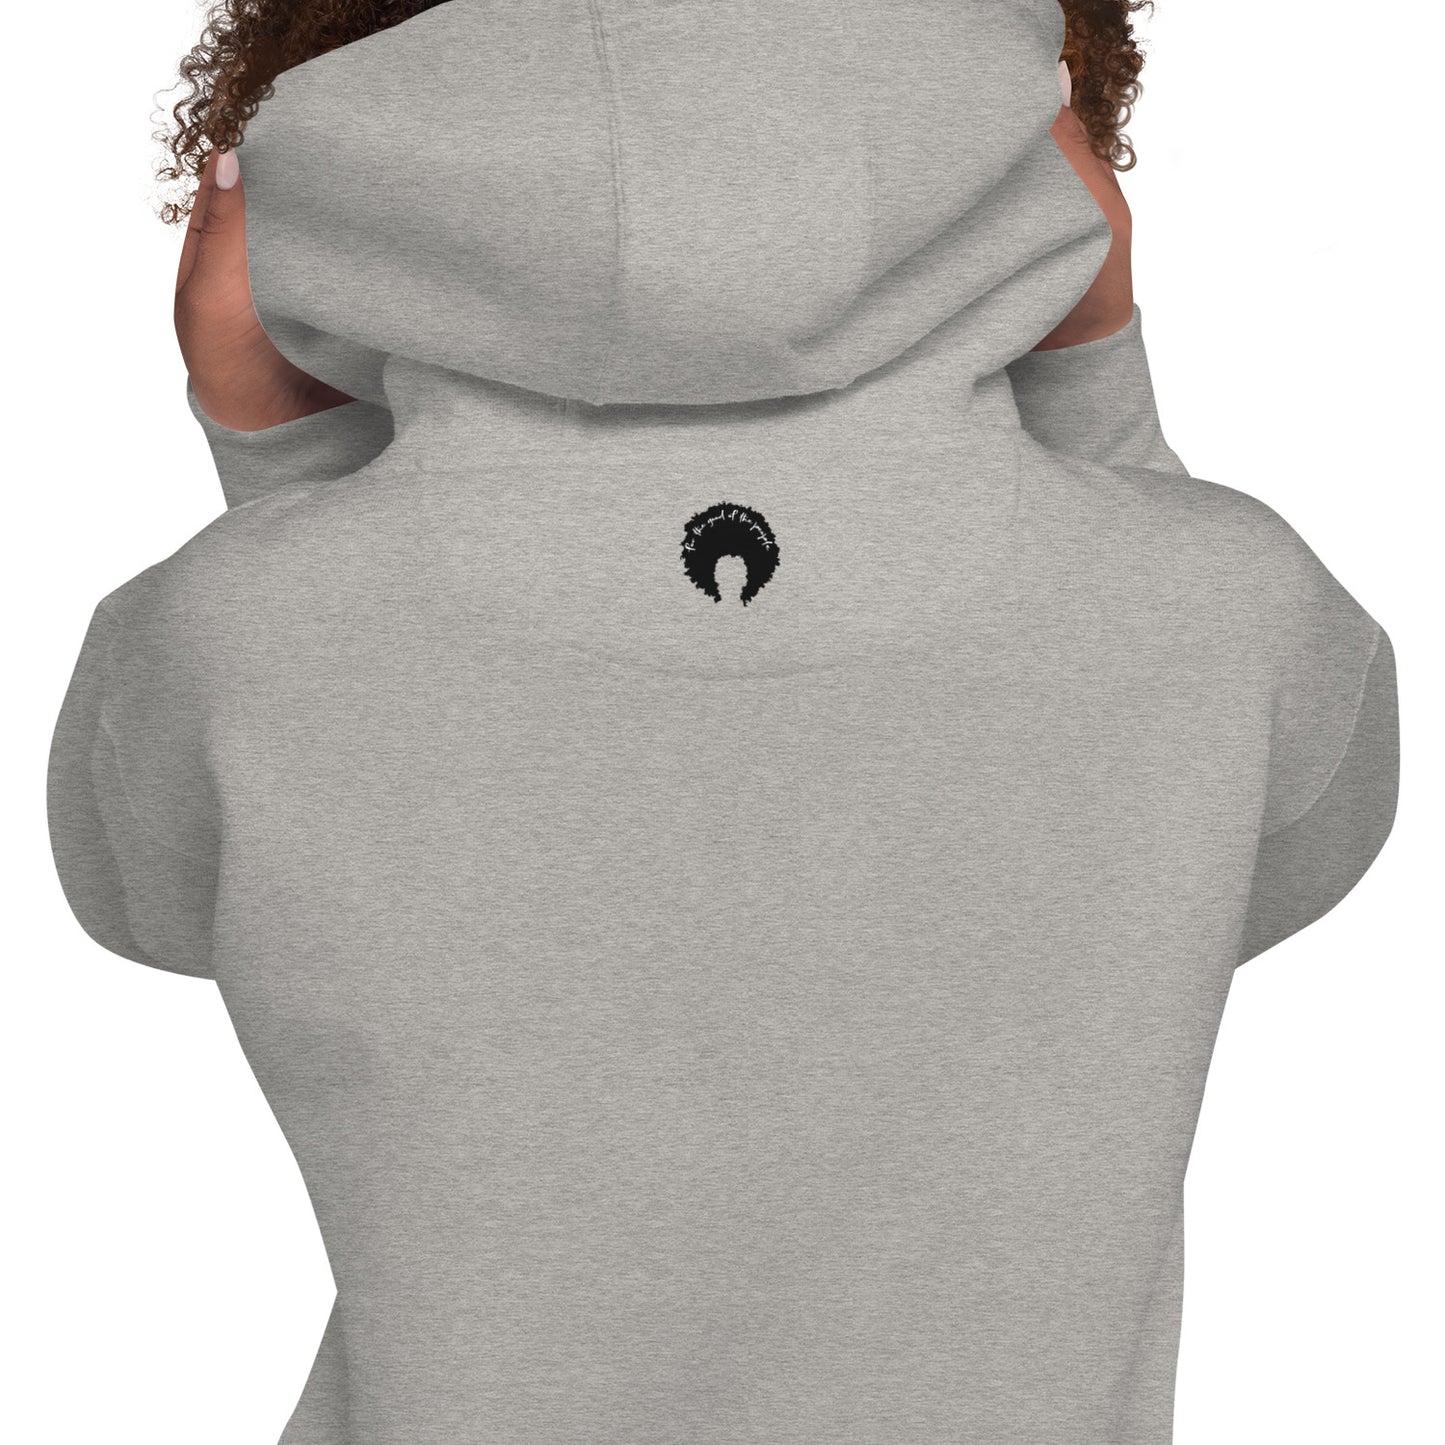 Unapologetically Bold Hoodie